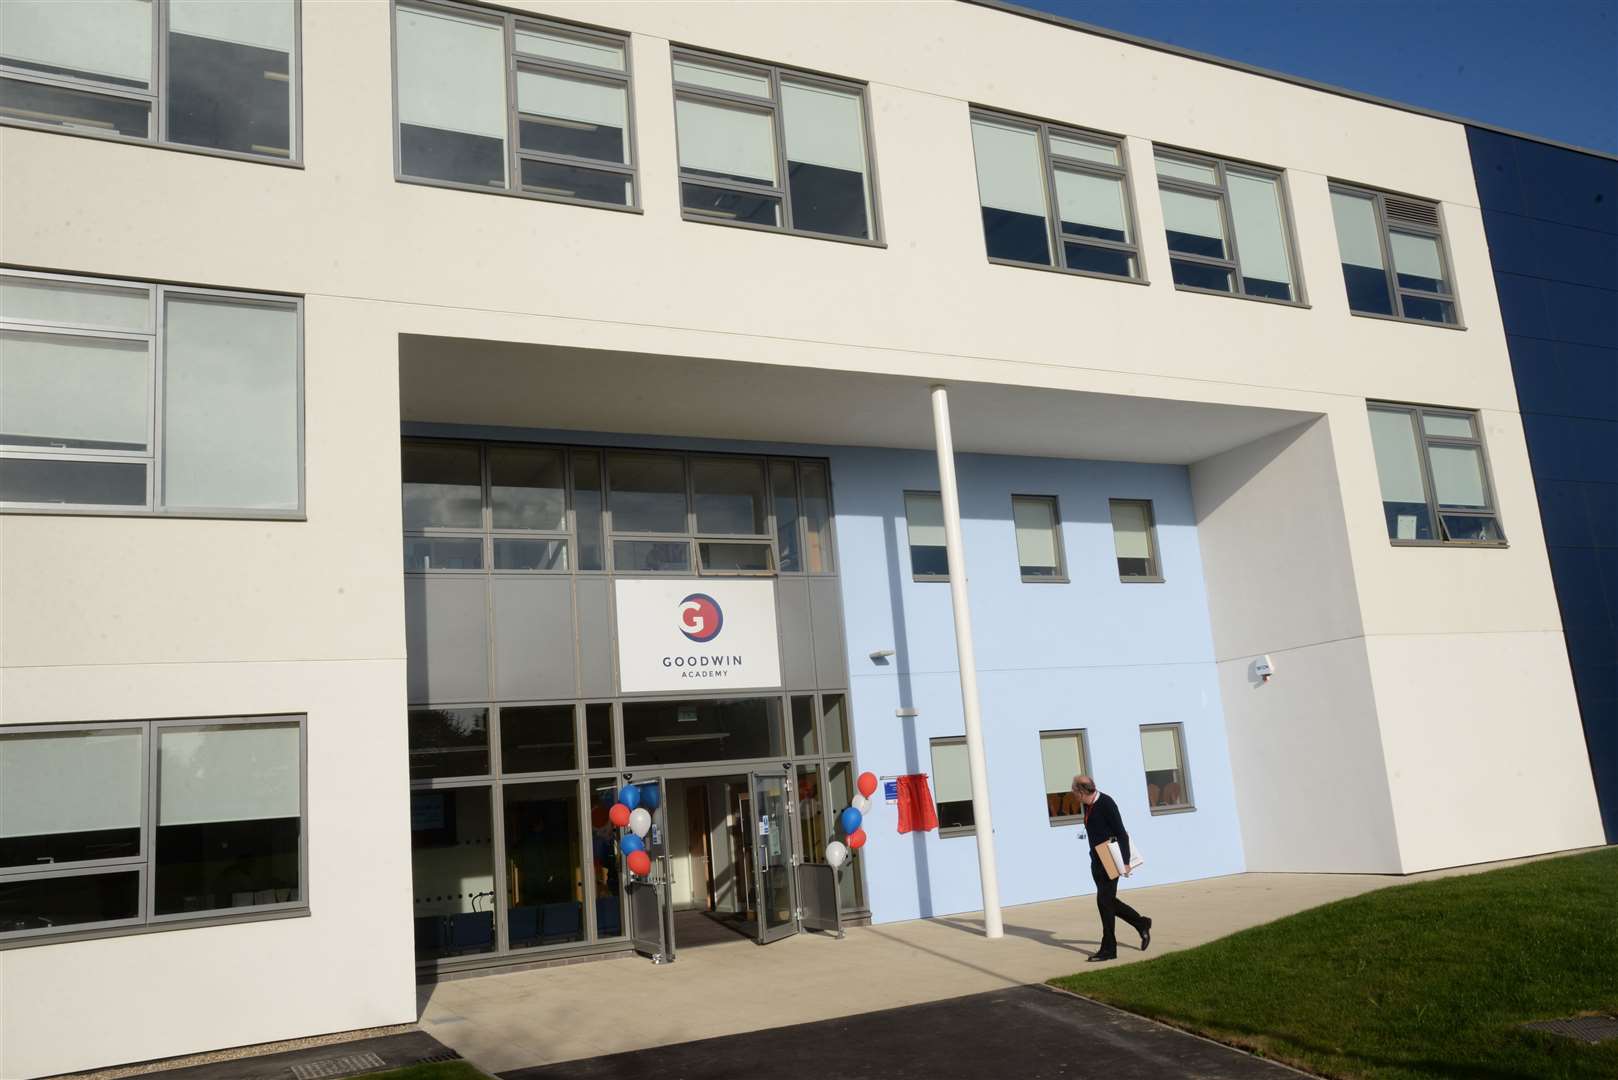 Goodwin Academy in Deal has confirmed both a teacher and a Year 10 pupil have tested positive for Covid-19 Picture: Chris Davey